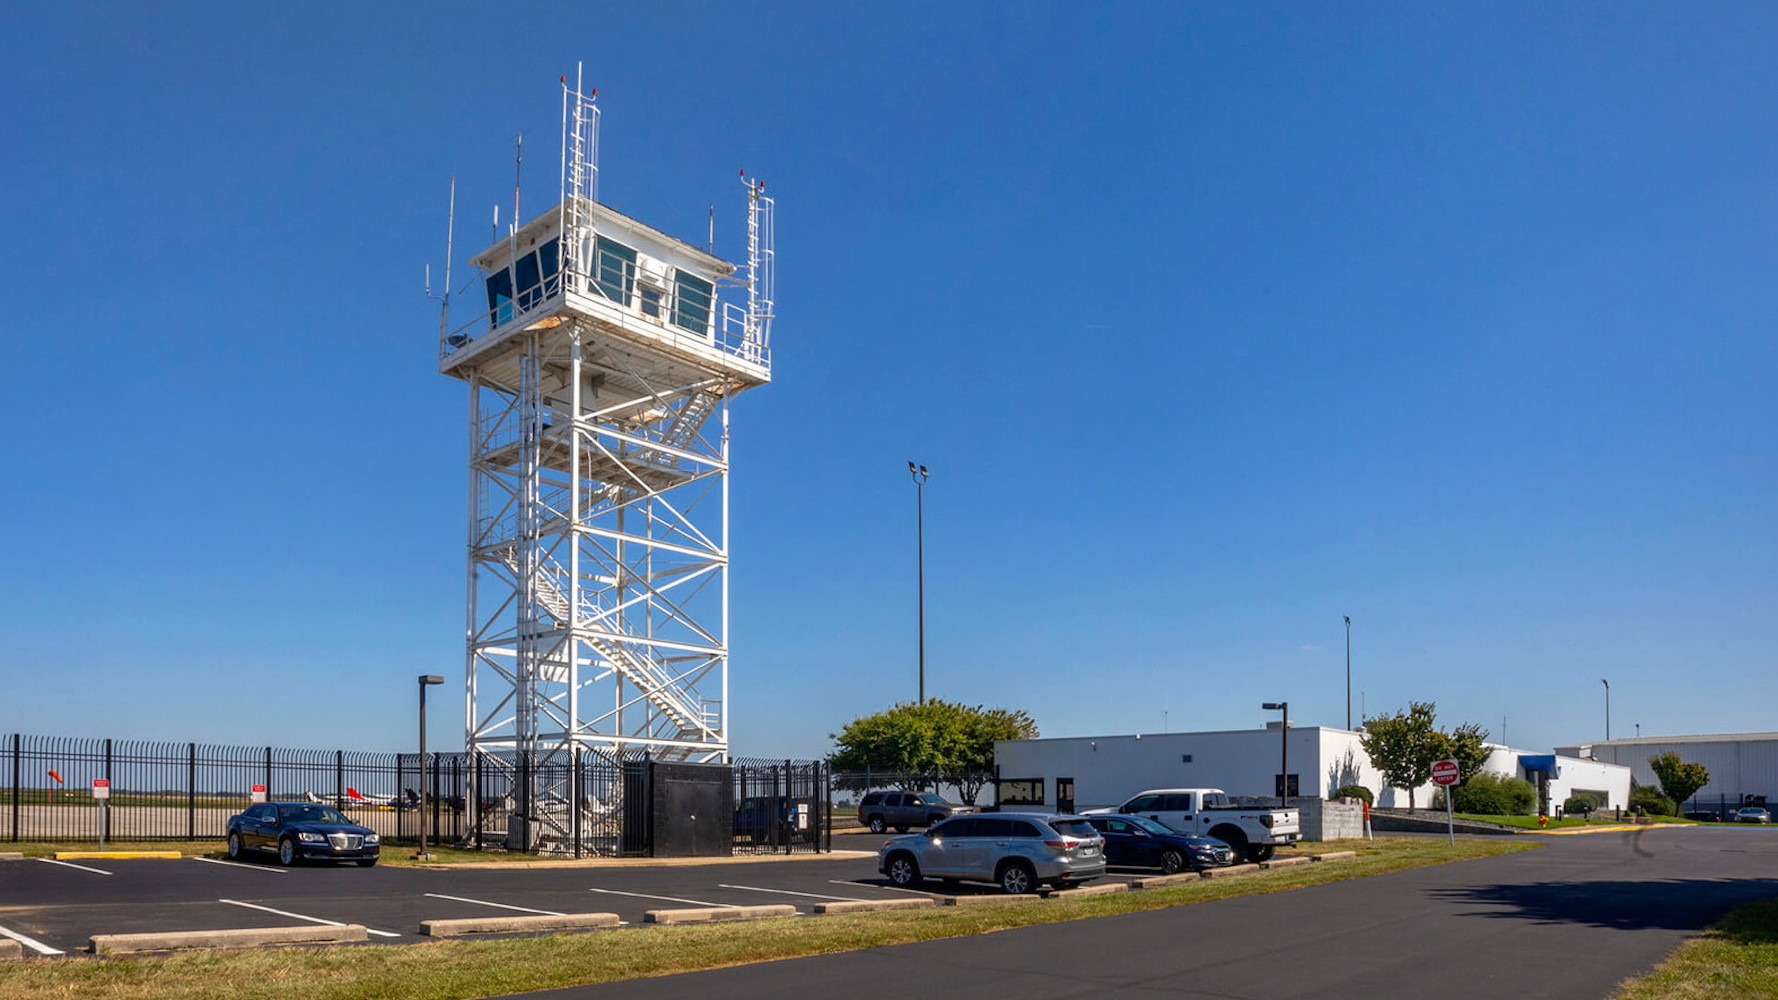 air traffic control tower at a small airport in columbus, indiana